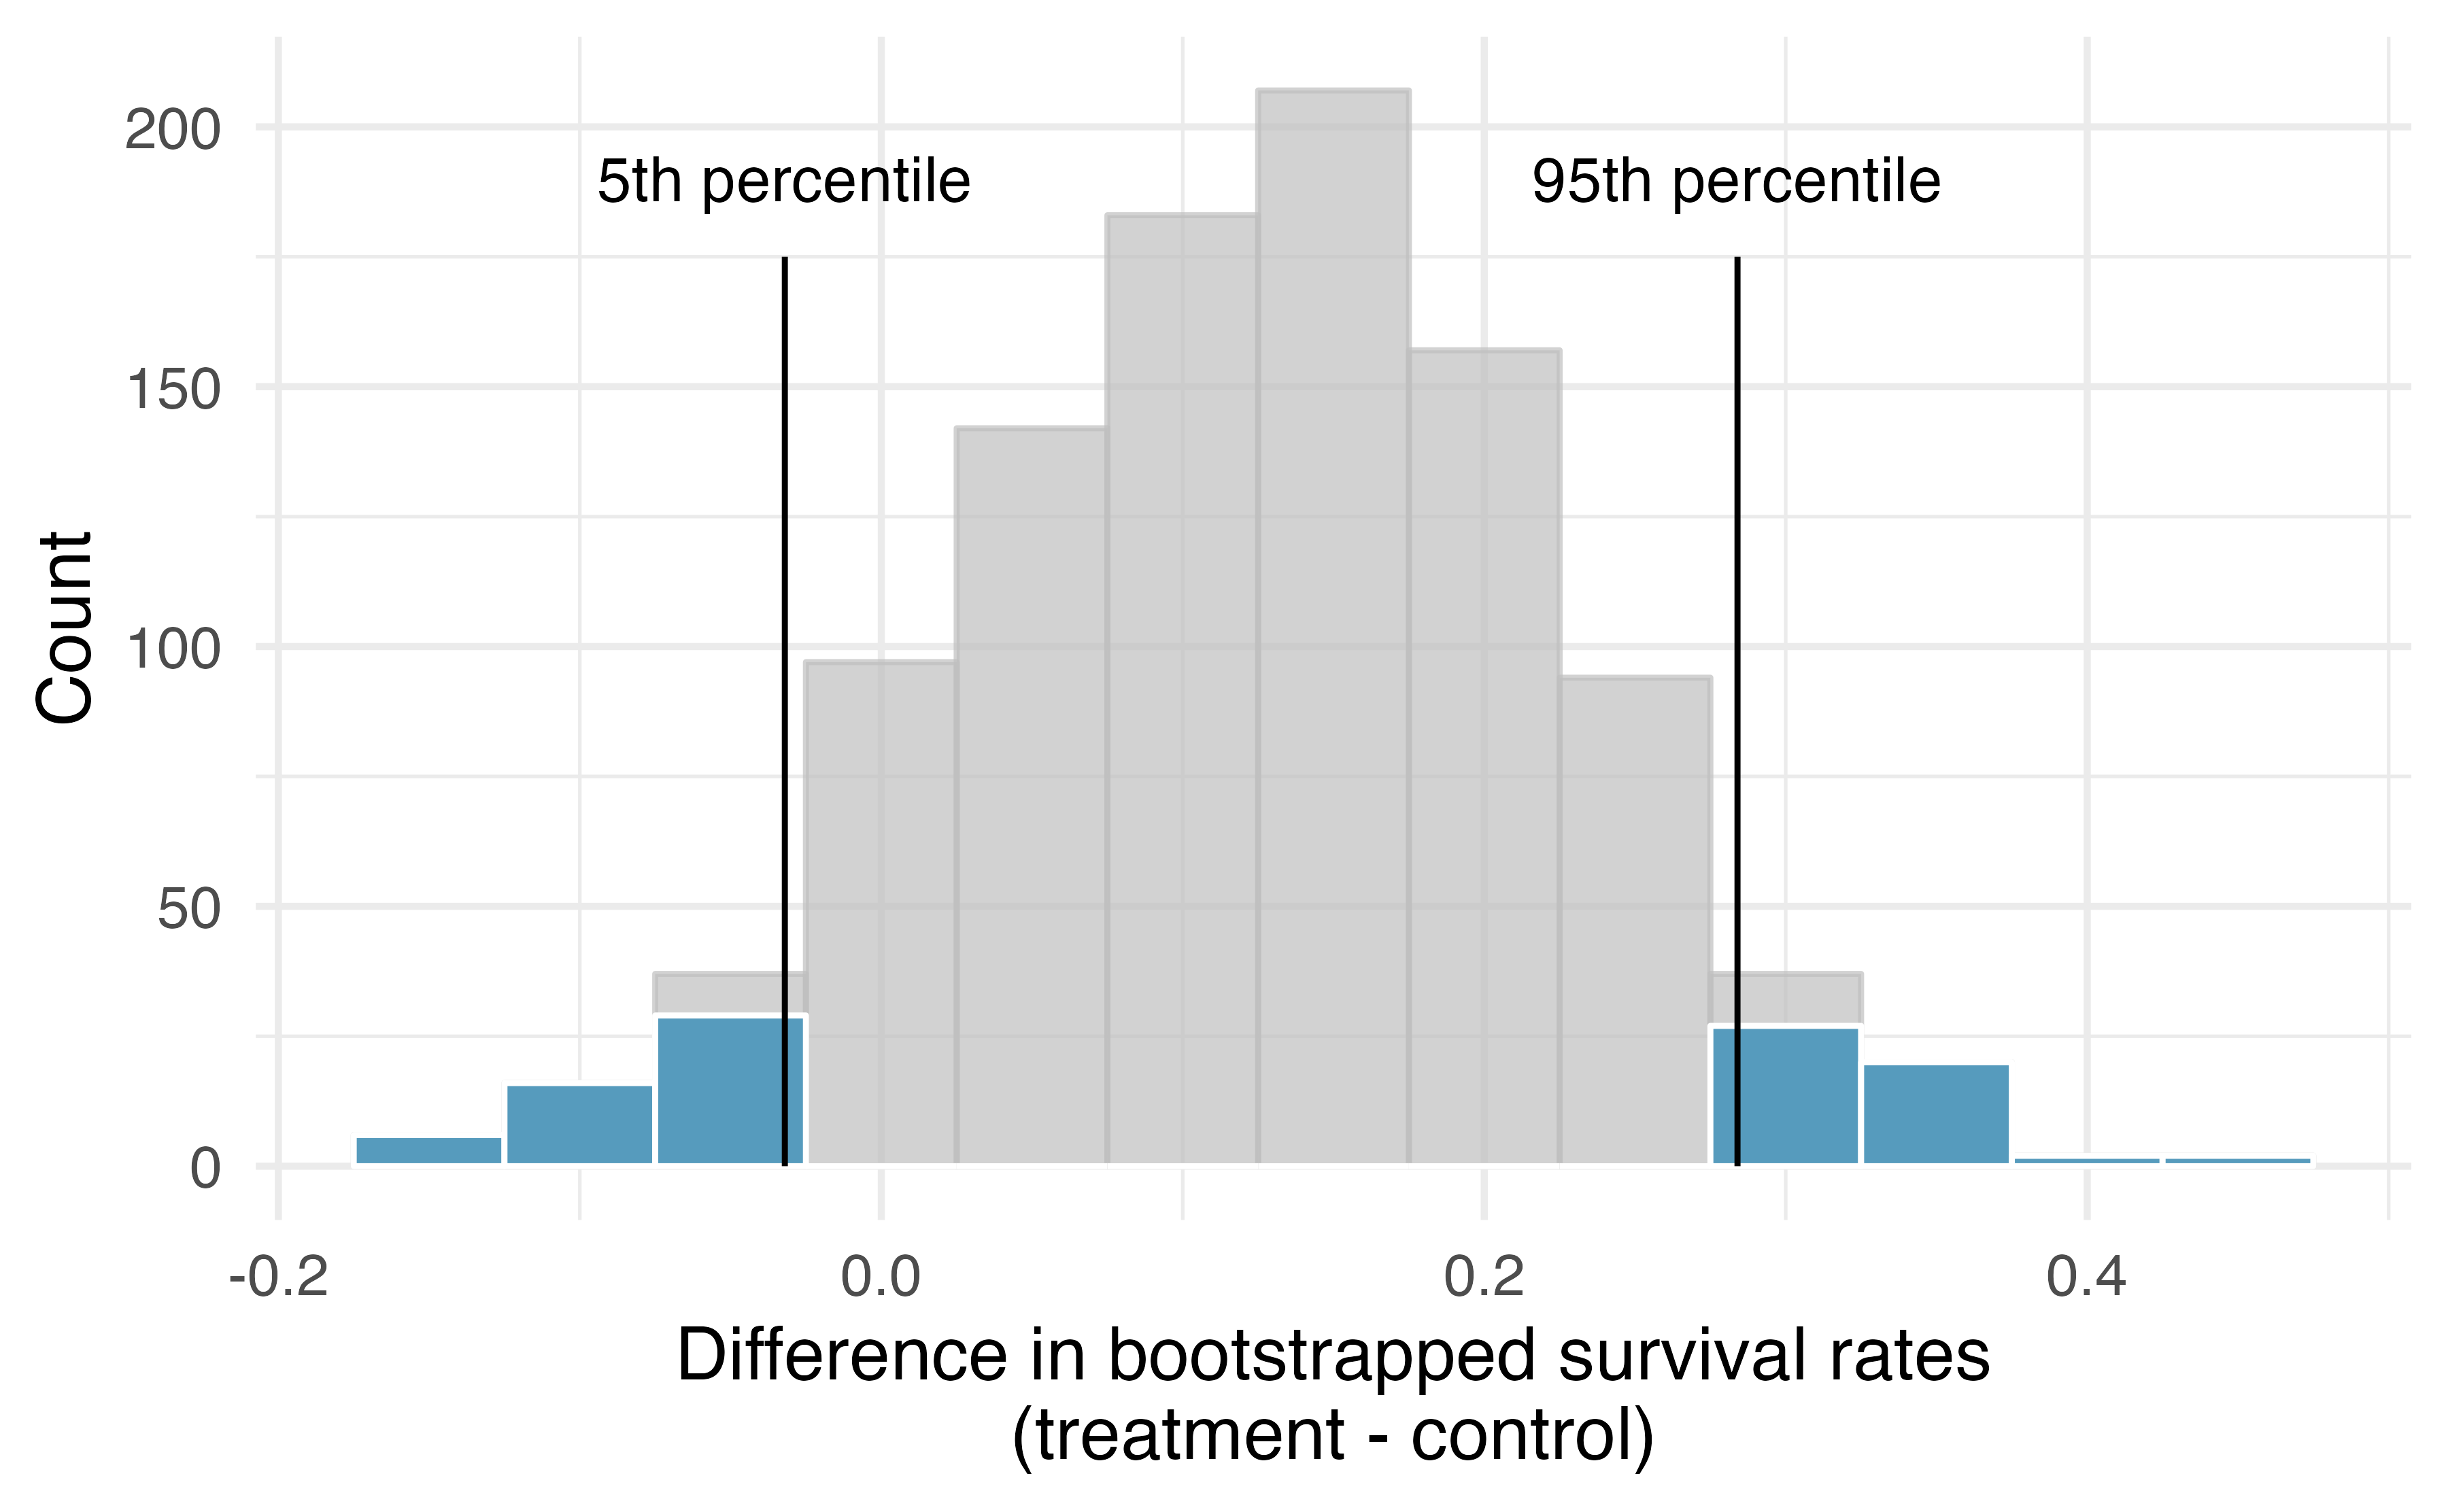 The CPR data is bootstrapped 1,000 times. Each simulation creates a sample from the original data where the probability of survival in the treatment group is $\hat{p}_{T}  = 14/40$ and the probability of survival in the control group is $\hat{p}_{C} = 11/50.$ 